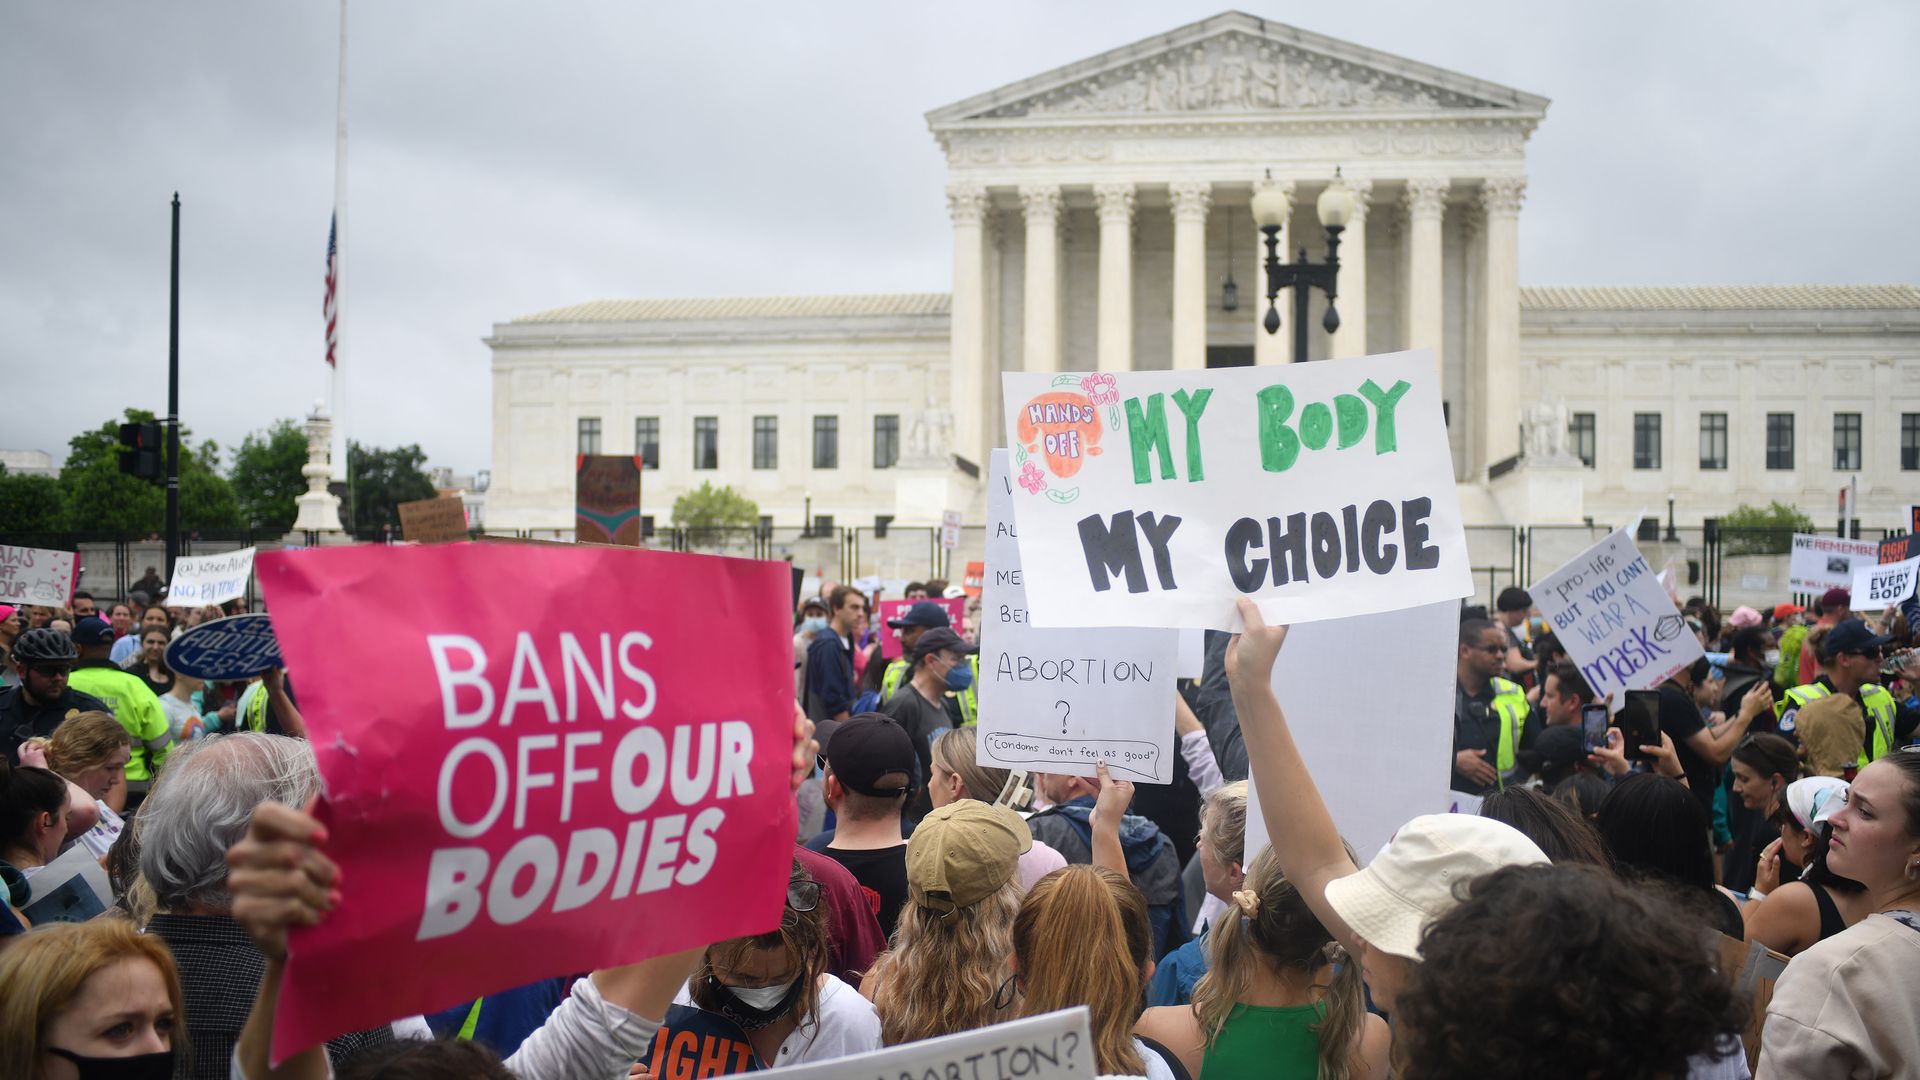 Picture of signs that say "bans off our bodies" and "my body my choice" being held up in front of the Supreme Court